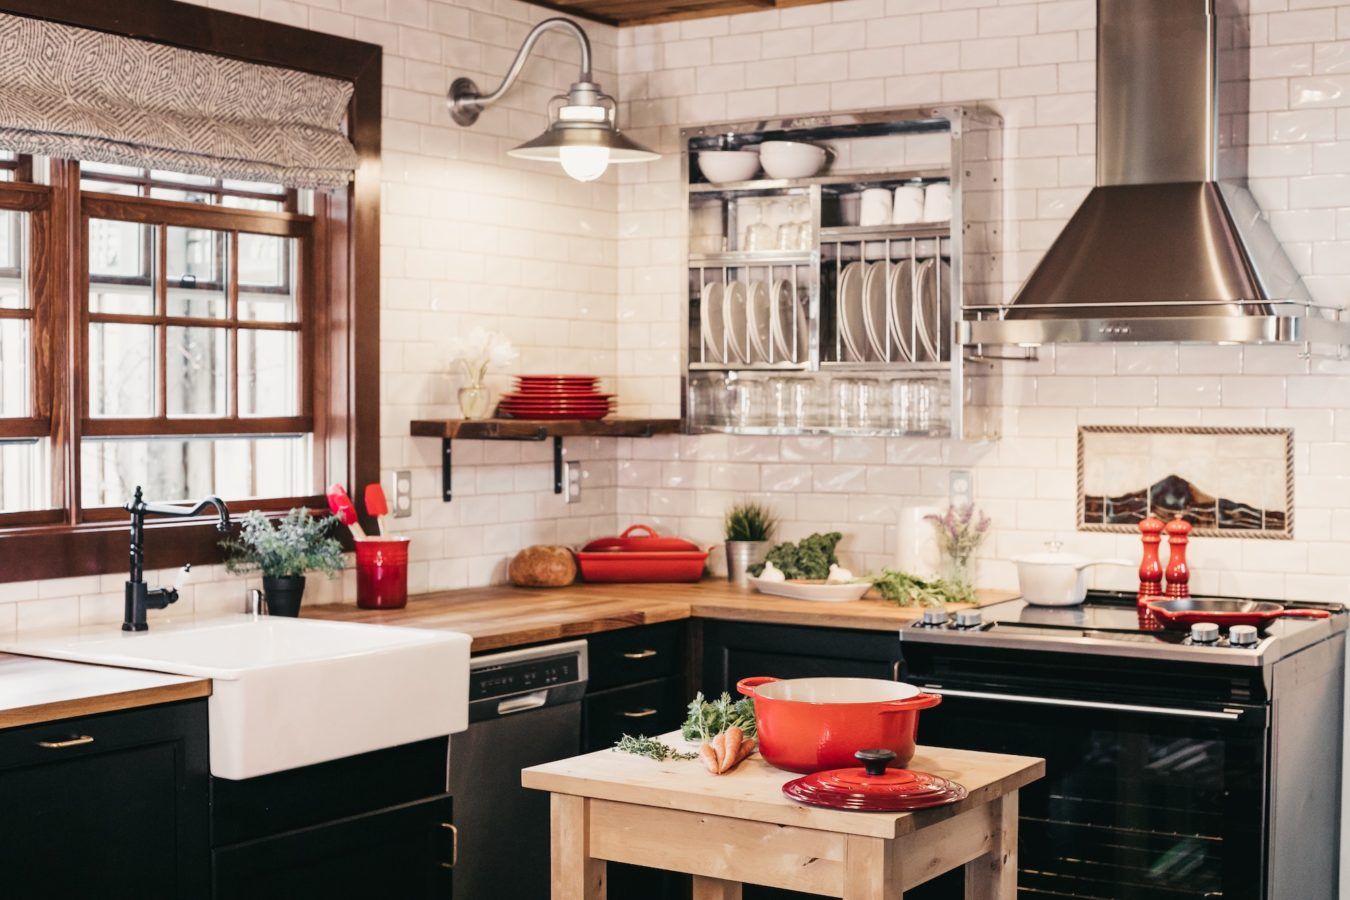 4 kitchen trends that need to be retired asap, according to designers